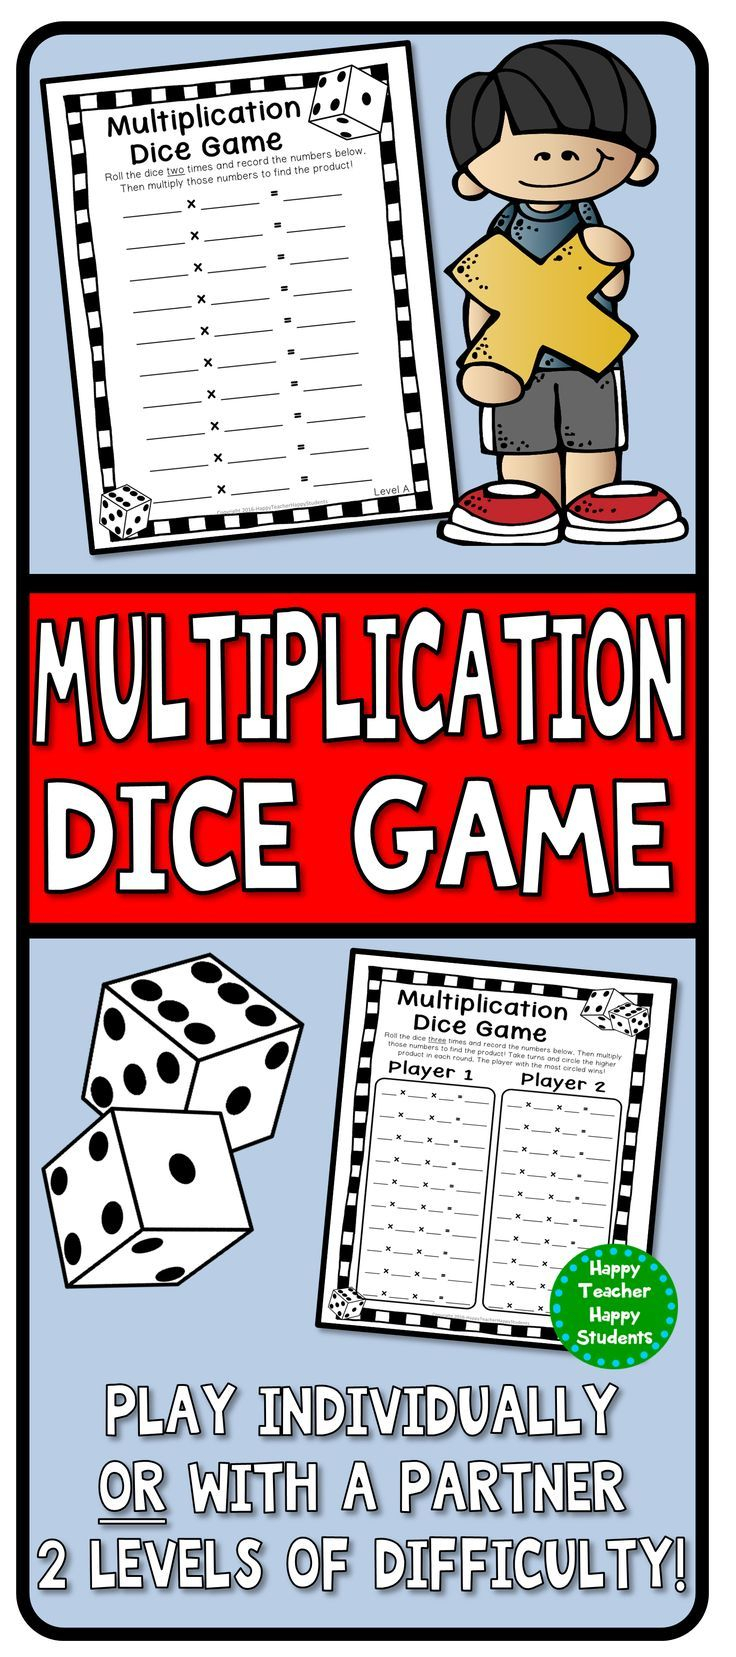 Multiplication Dice Game: 4 Versions Included with Printable Multiplication Games With Dice